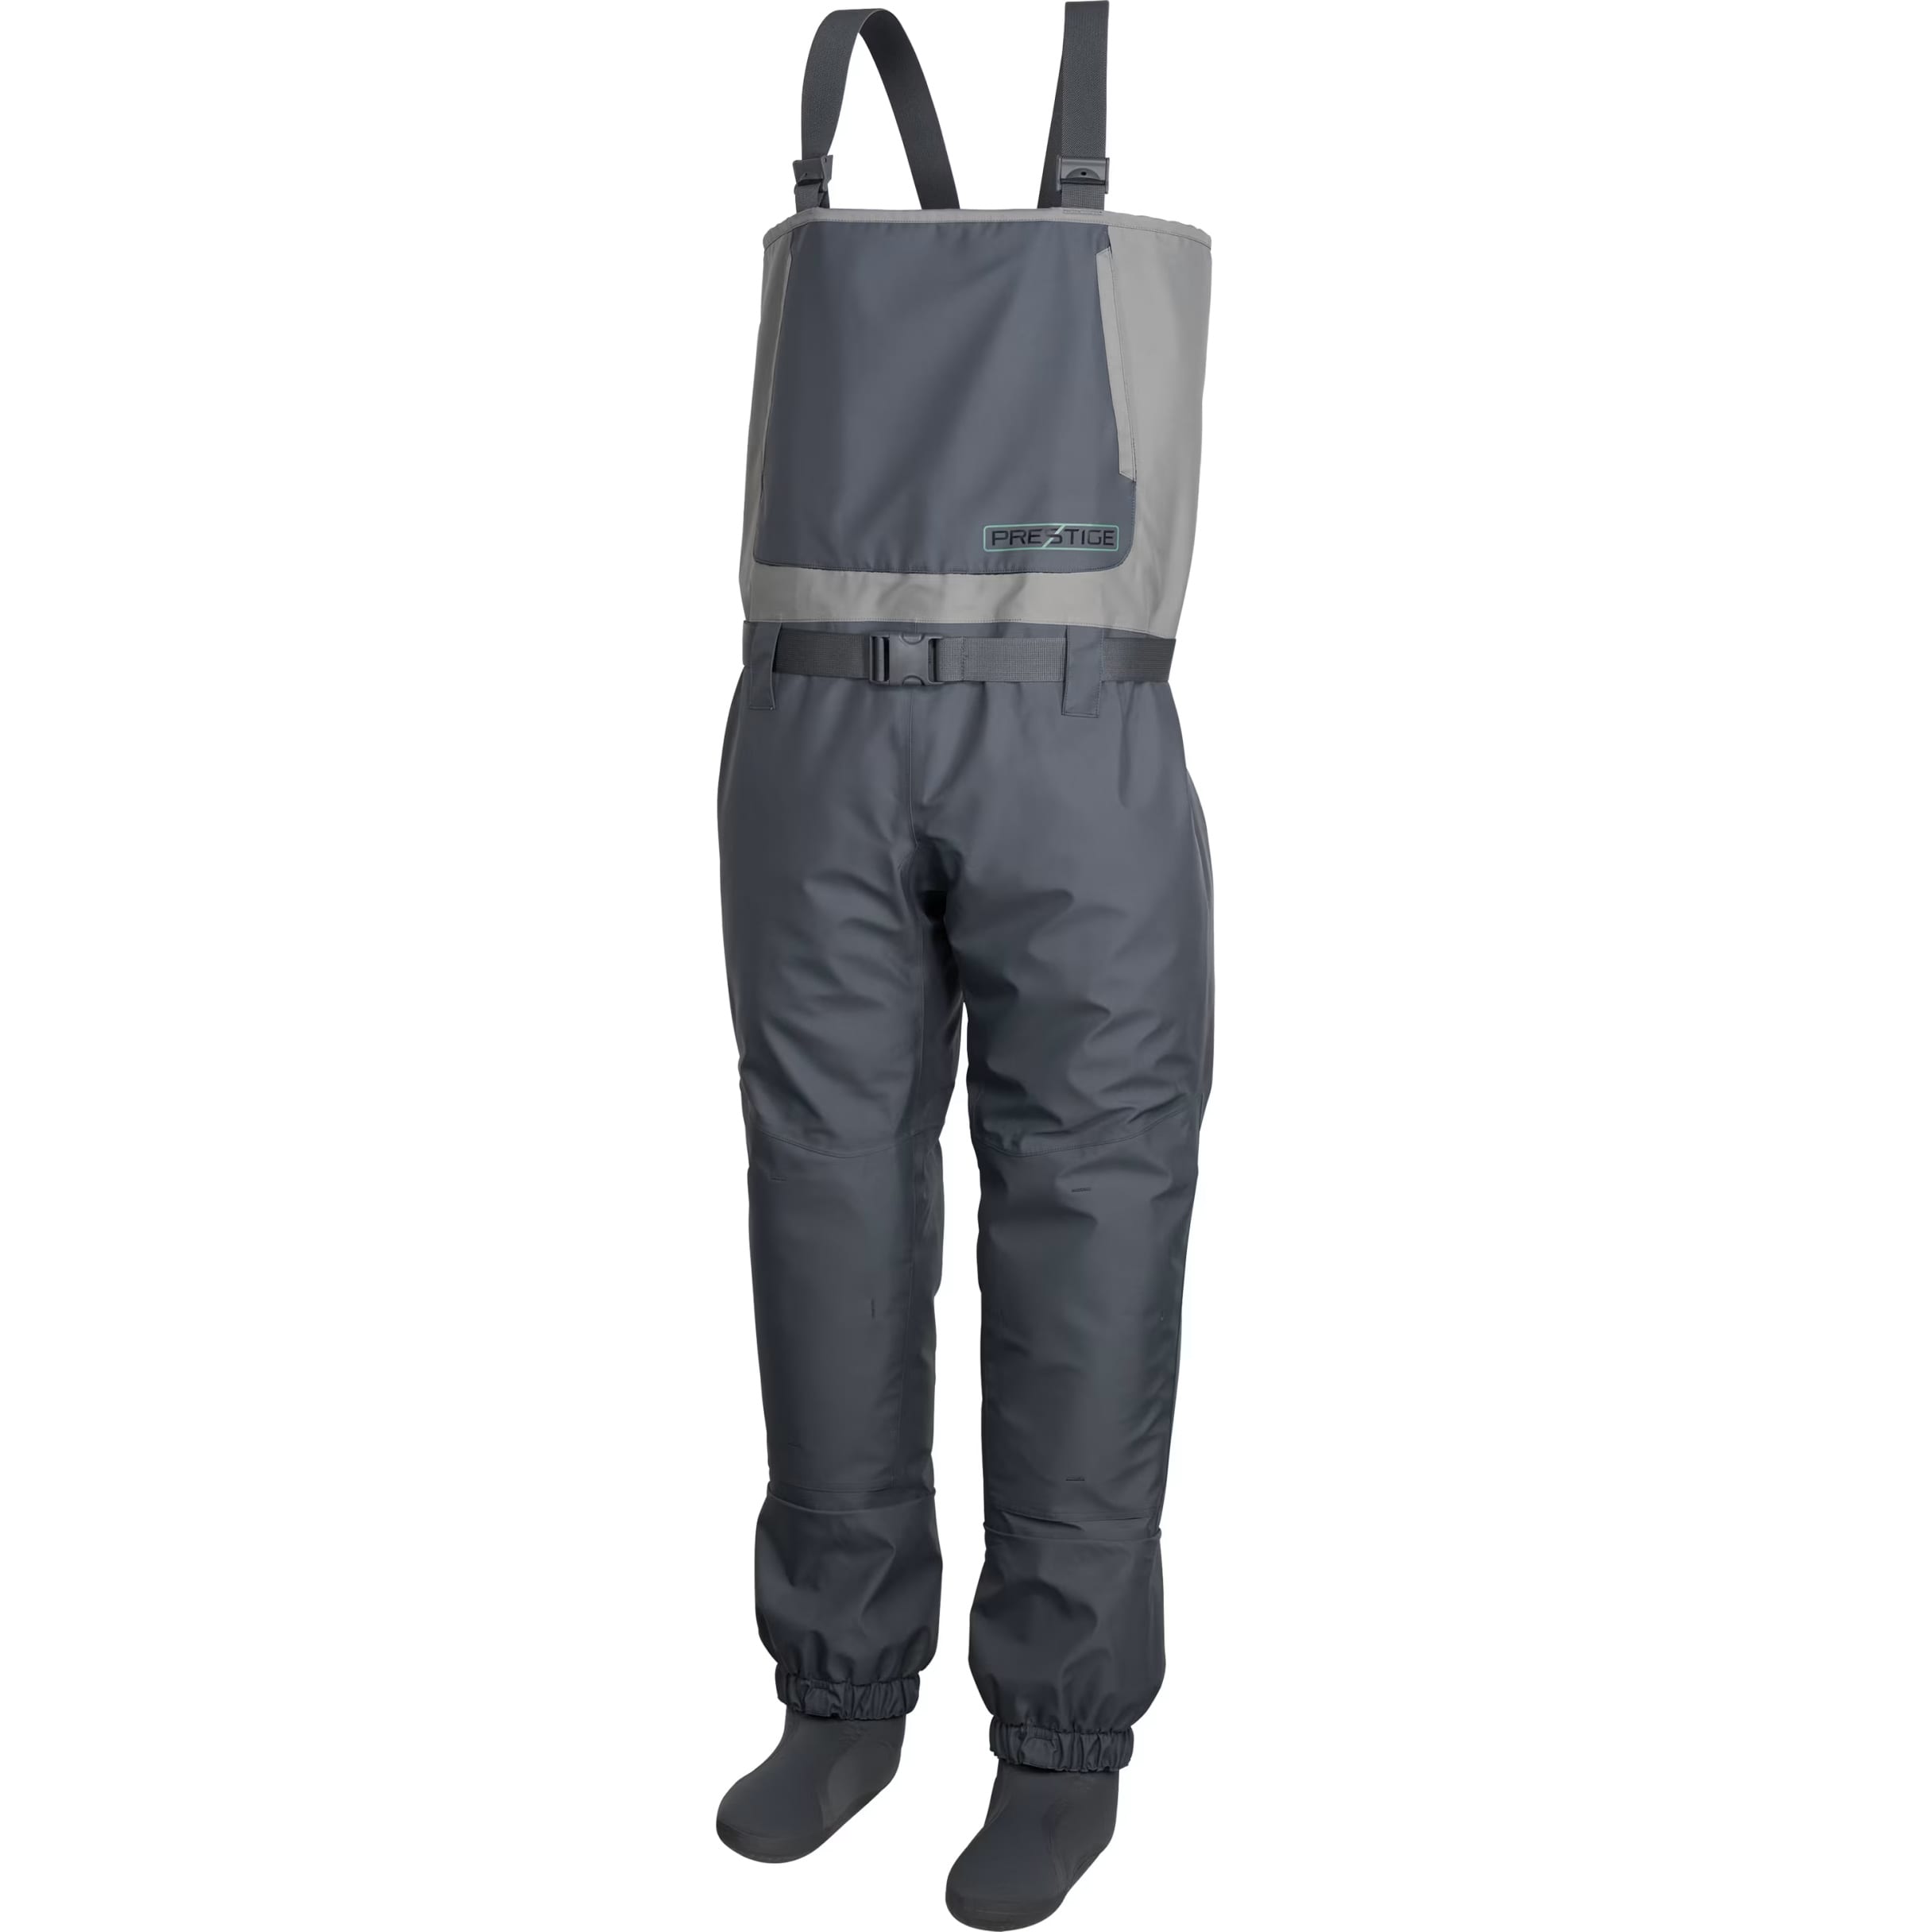 White River Fly Shop® Men’s Prestige Stocking-Foot Chest Waders